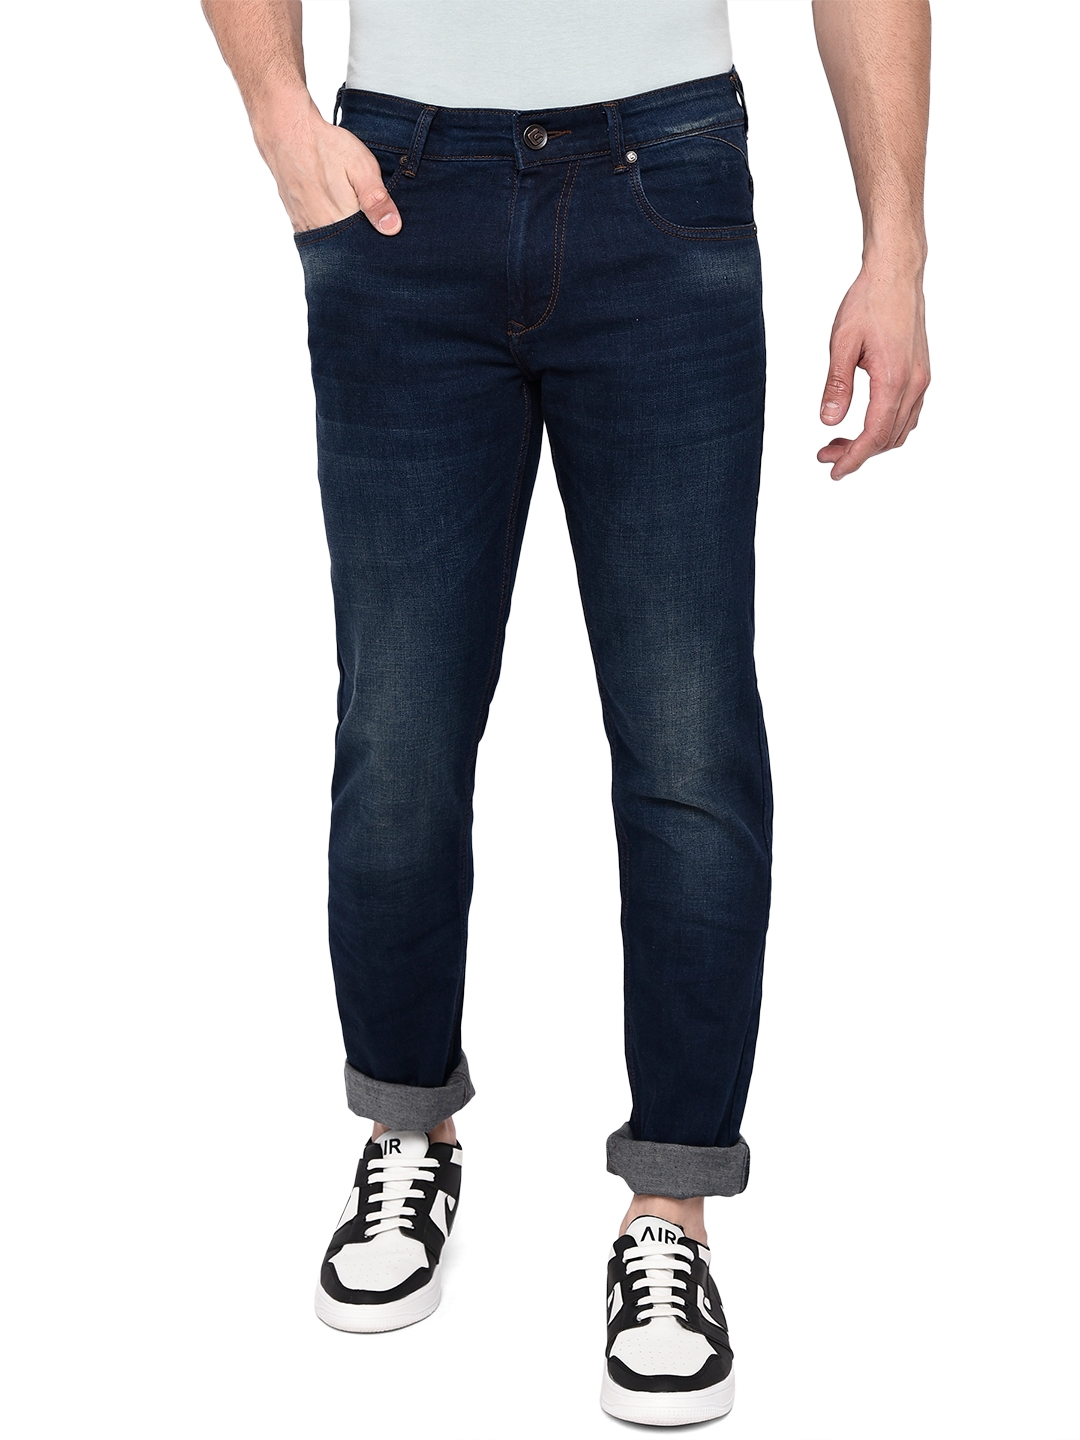 Greenfibre | Mid Blue Solid Narrow Fit Jeans | Greenfibre